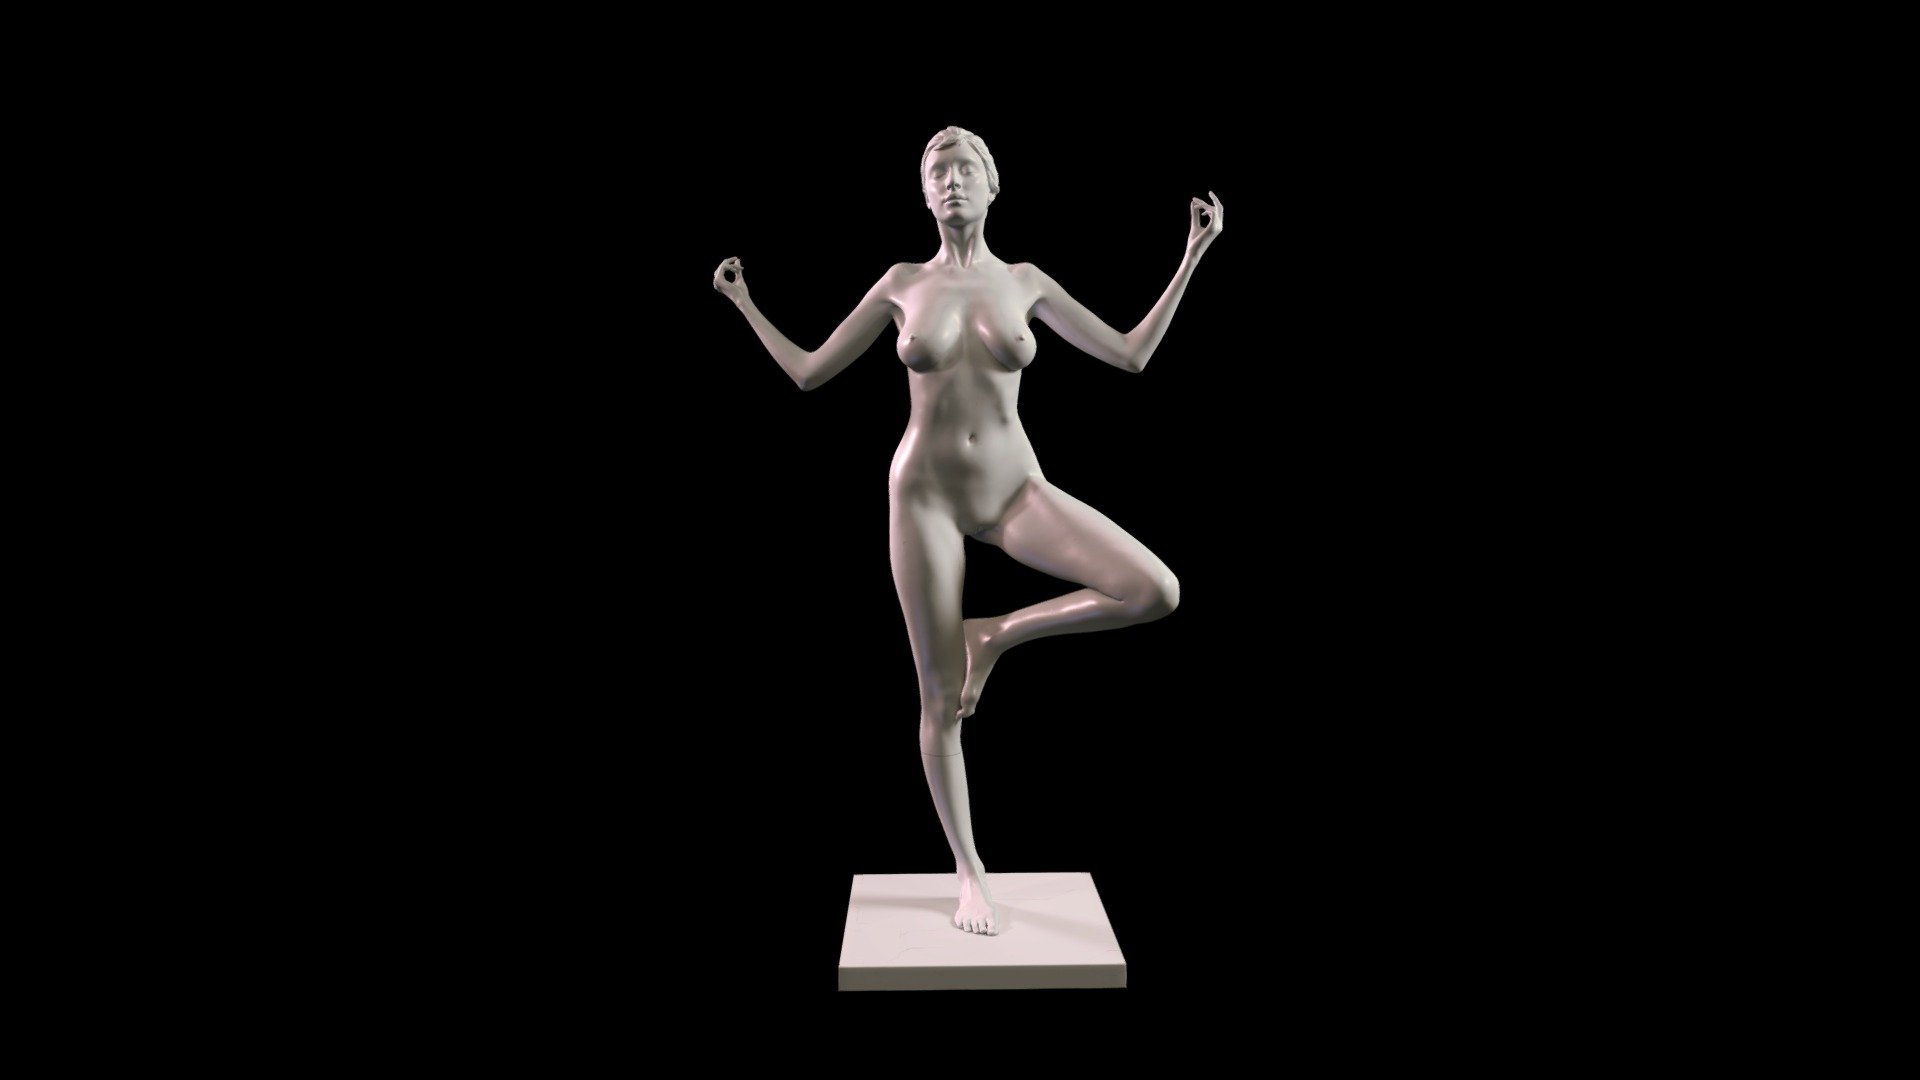 Coline 01-033 - Figurine version

Get your 3D printed sculpture at only-games.co

Other models and poses at another-gallery

This model has been scanned by  another-me.fr - Coline 01-033 - Figurine - 3D model by Another-me (@fredlucazeau) 3d model